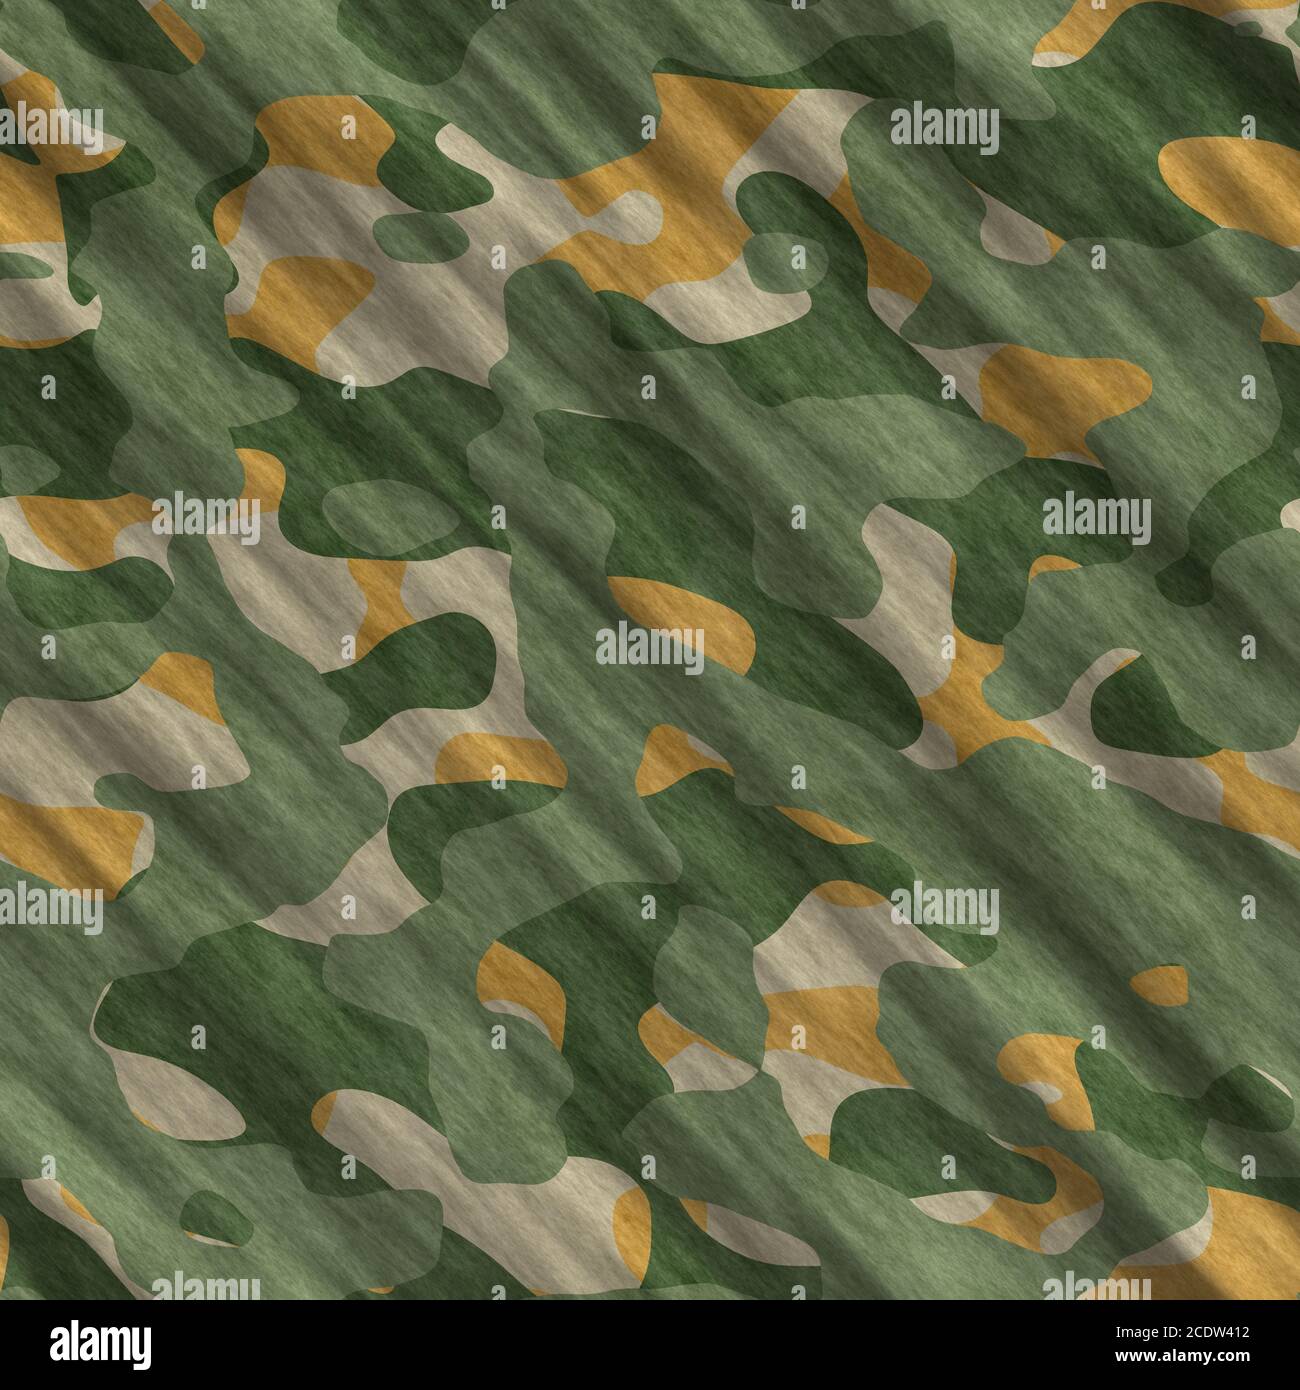 Camouflage pattern background seamless illustration. Classic clothing style masking camo repeat print. Green brown black olive c Stock Photo